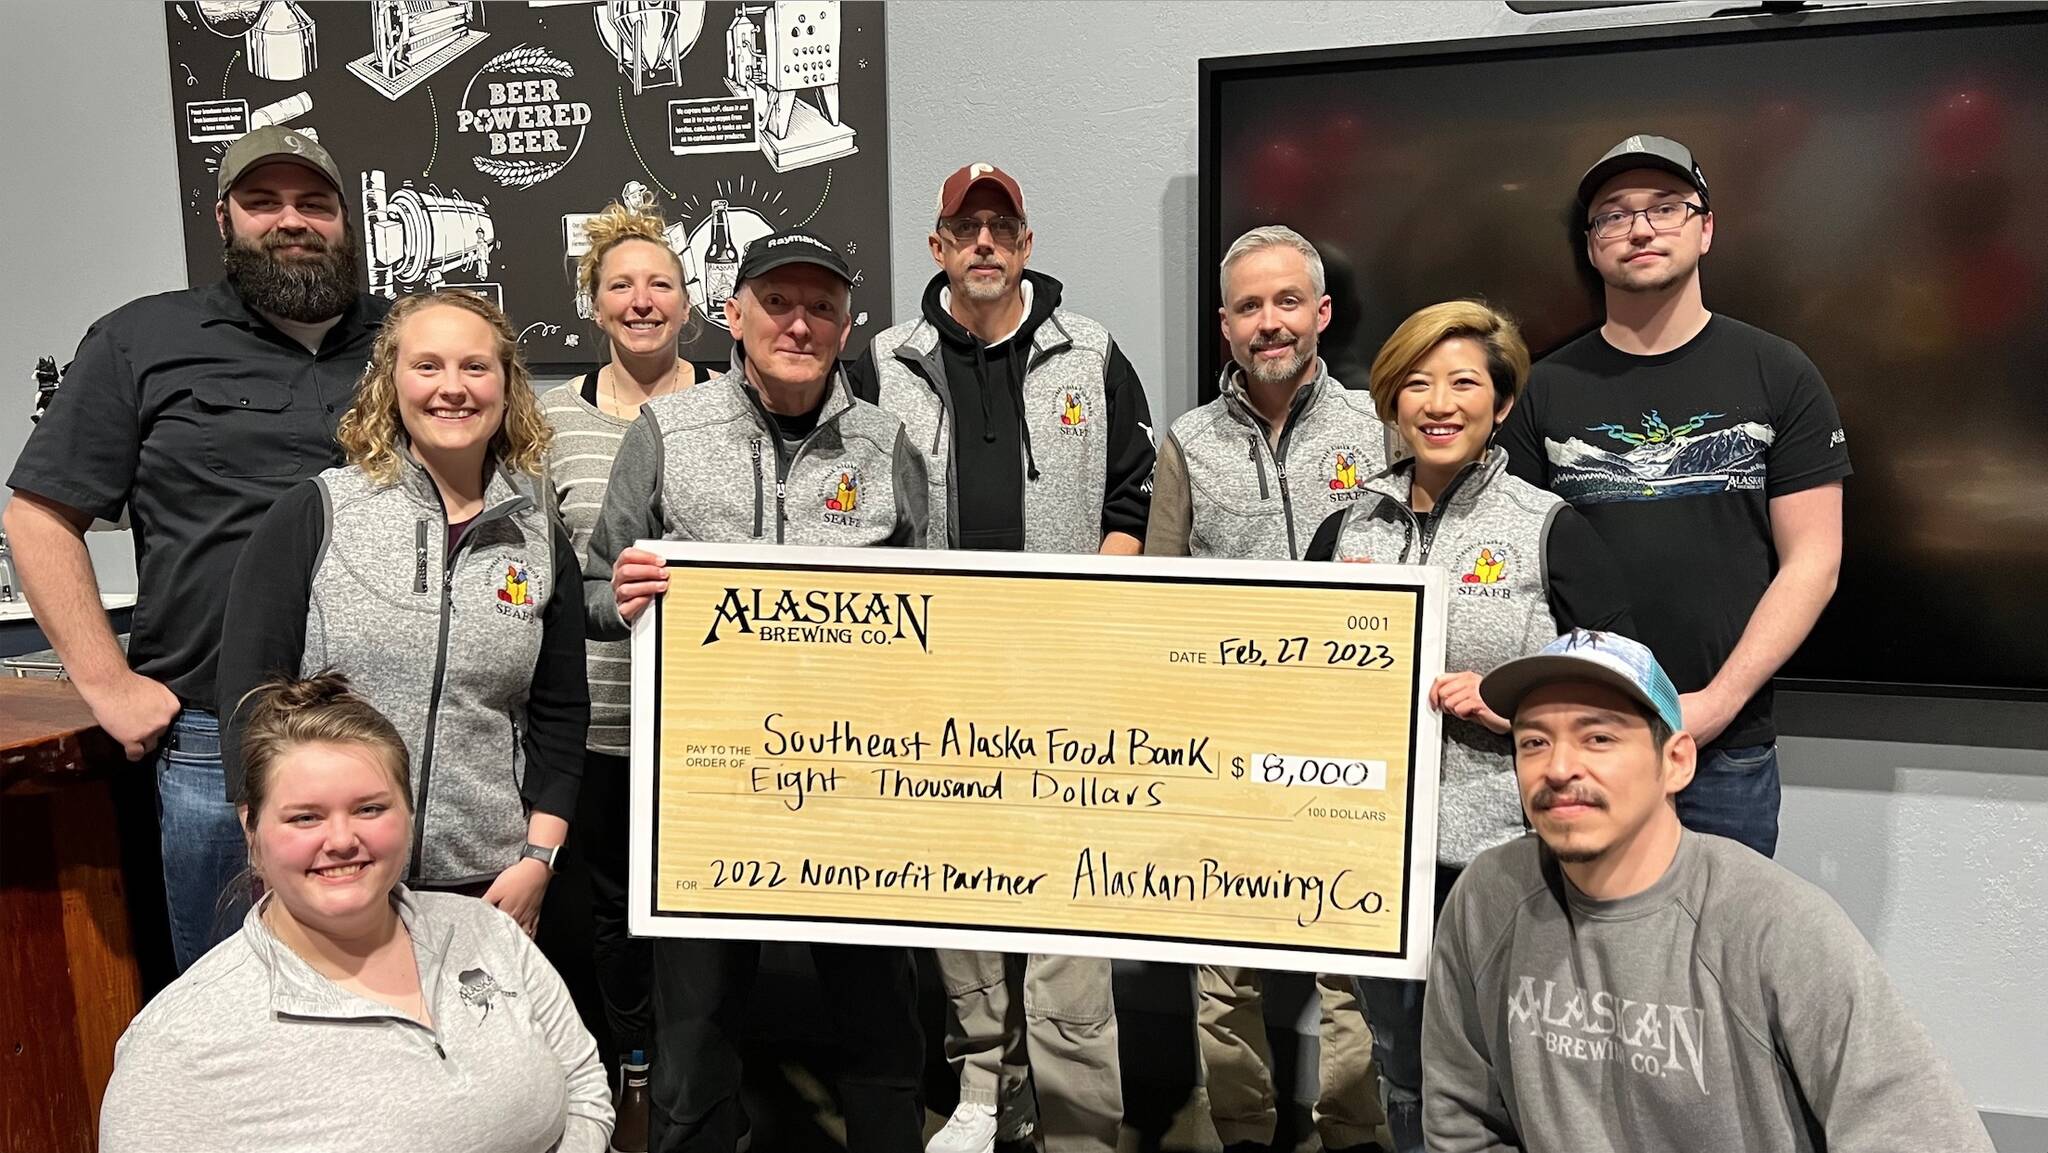 Alaskan Brewing Co. staff presents a check to Southeast Alaska Food Bank director Chris Schapp on Tuesday as part of the company’s “Cheers to the Southeast Alaska Food Bank!” celebration. The evening also celebrated the selection of Alaskan Brewing Co. next year recipient SEADOGS. (Courtesy Photo / Erin Youngstrom)